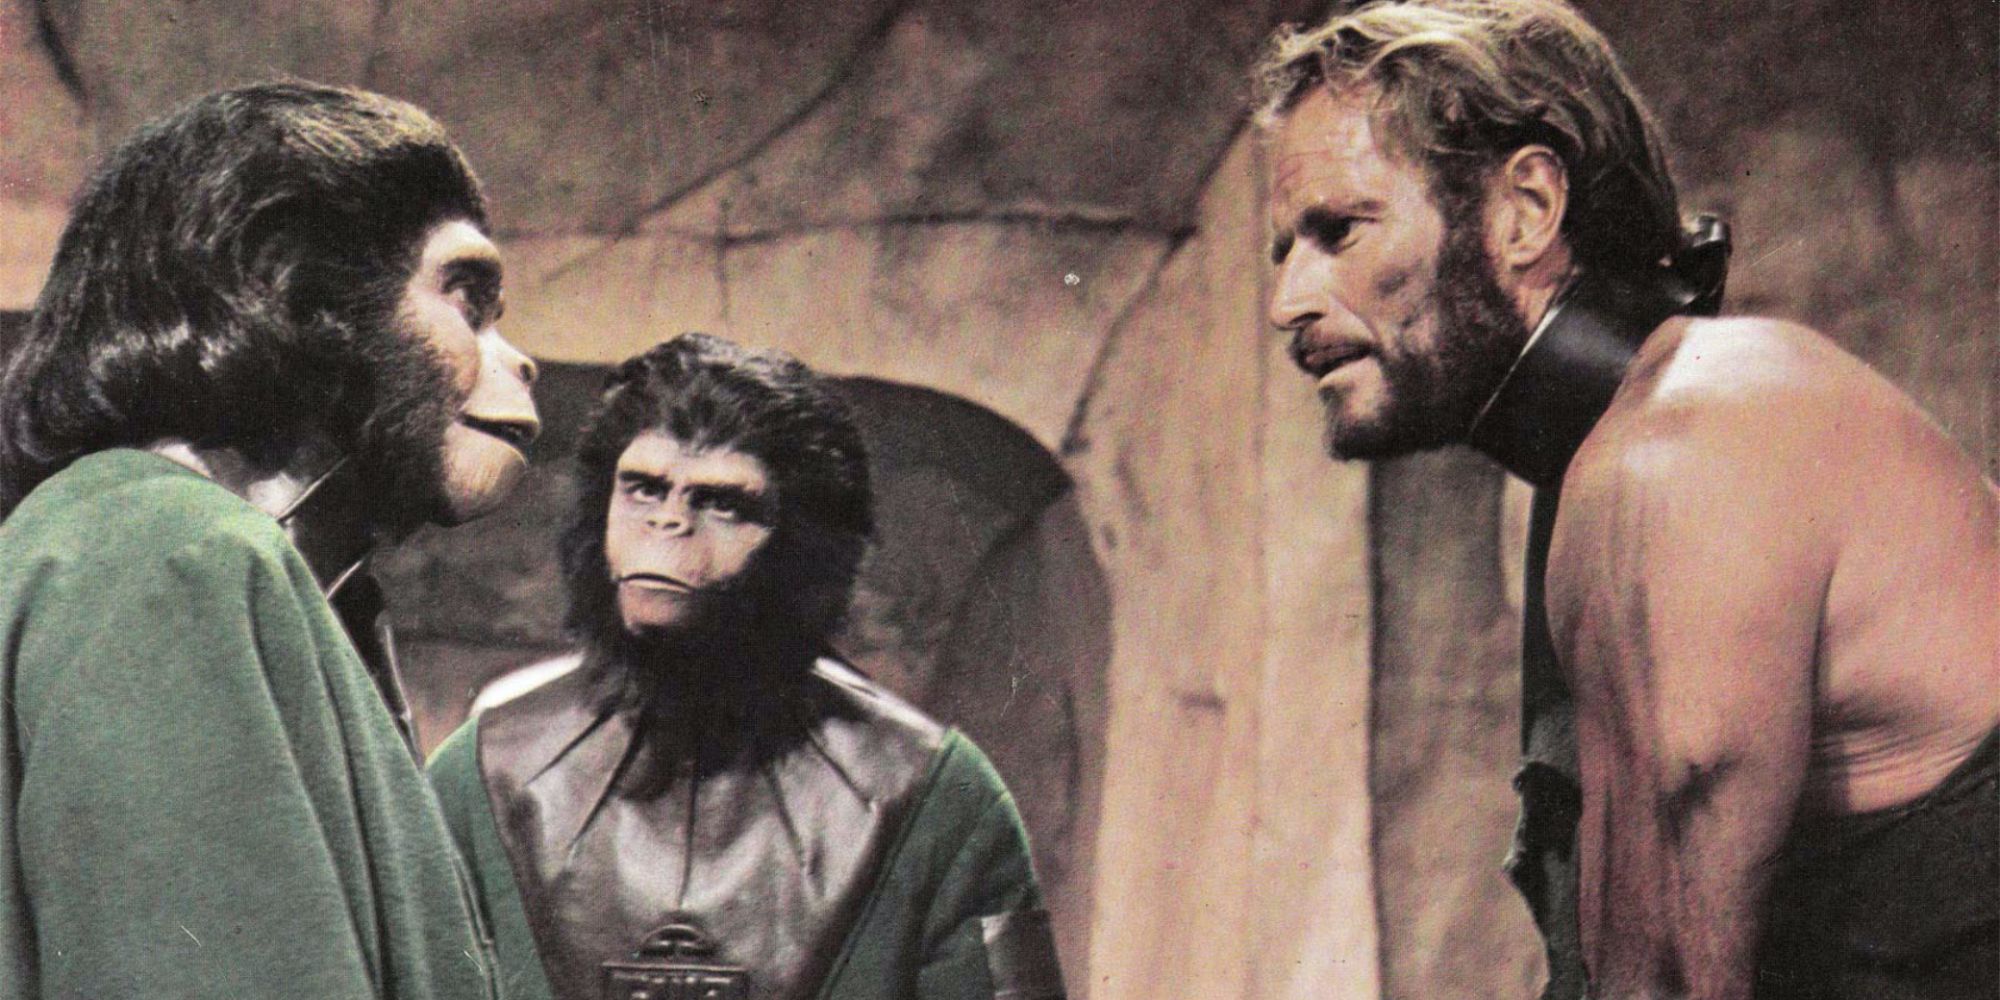 Planet-of-the-Apes, Charlston Heston 